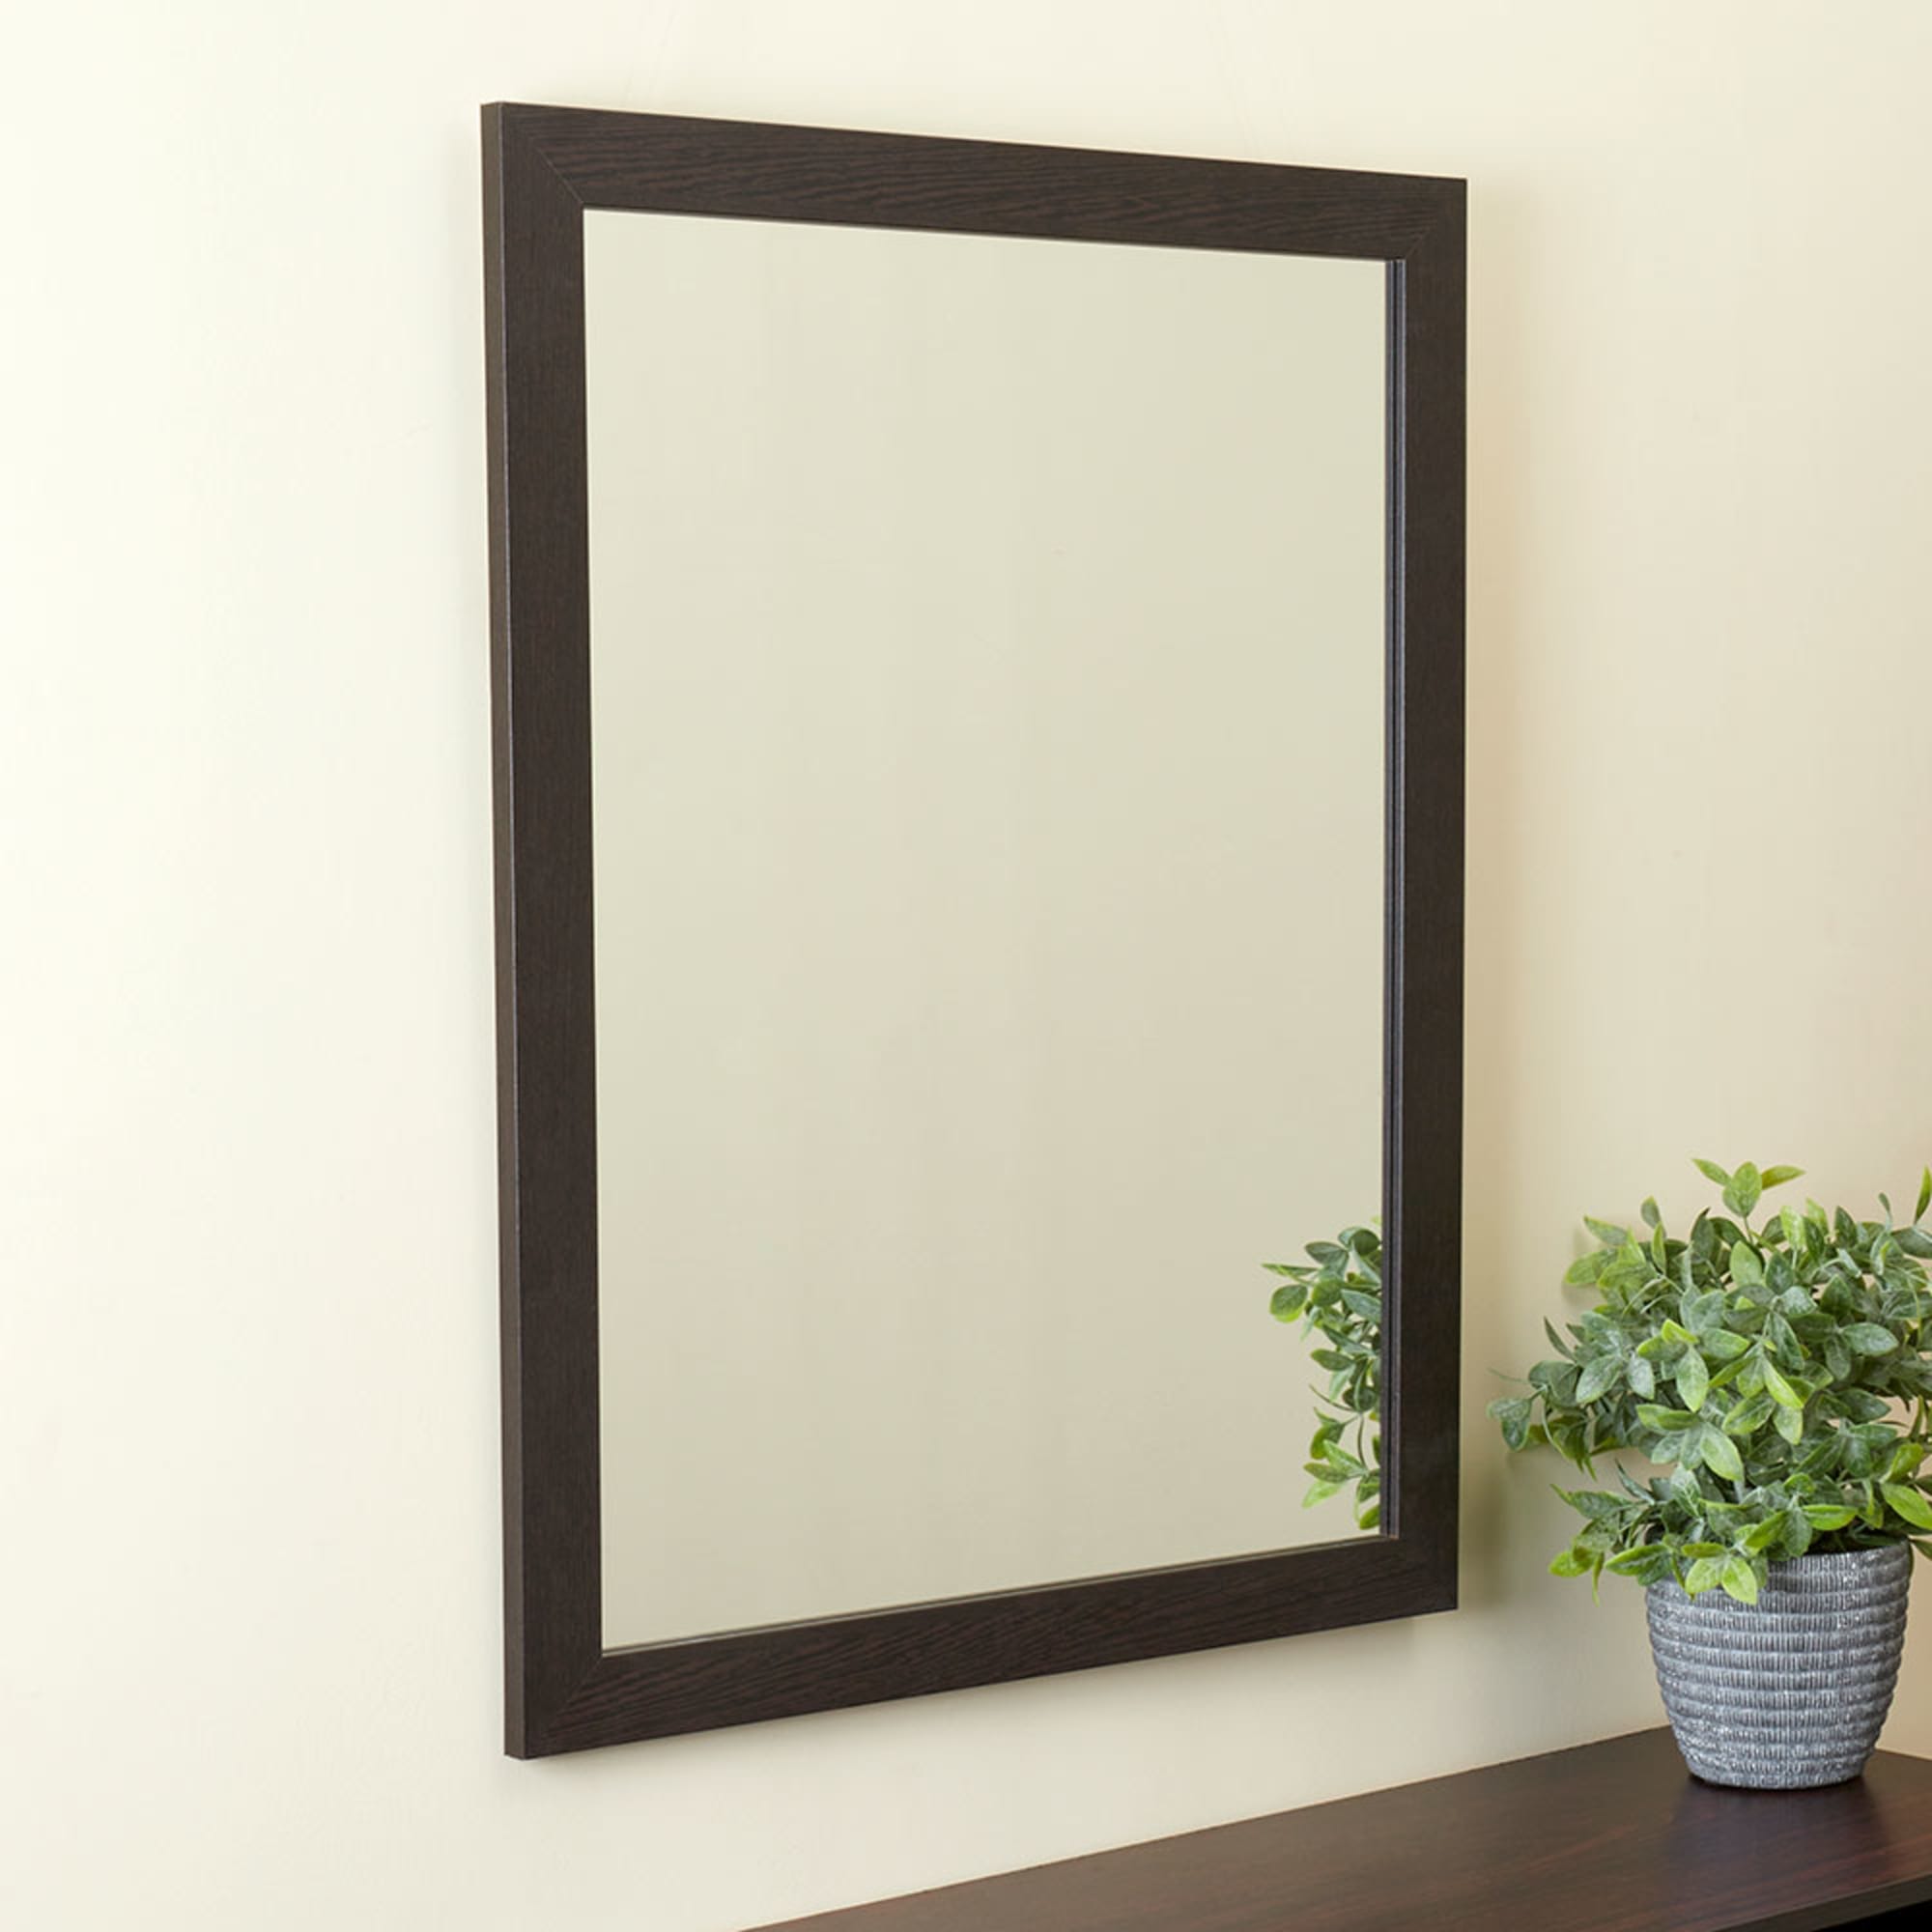 Home Basics Framed Painted MDF 18” x 24” Wall Mirror, Mahogany $10.00 EACH, CASE PACK OF 6